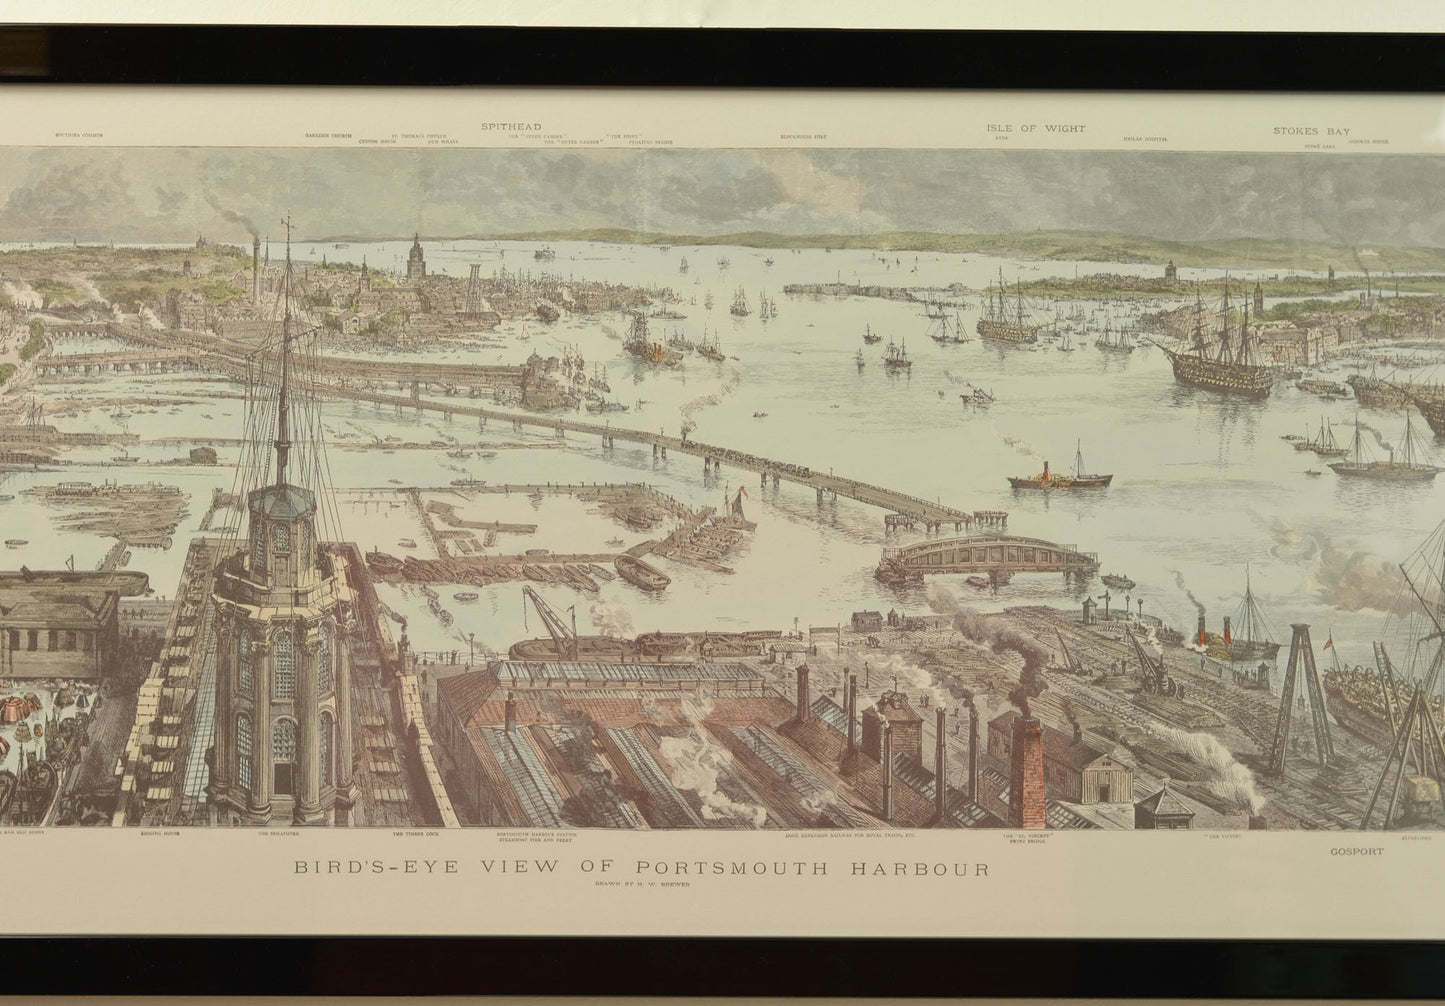 Bird's Eye View of Portsmouth Harbour by H.W. Brewer, c.1885